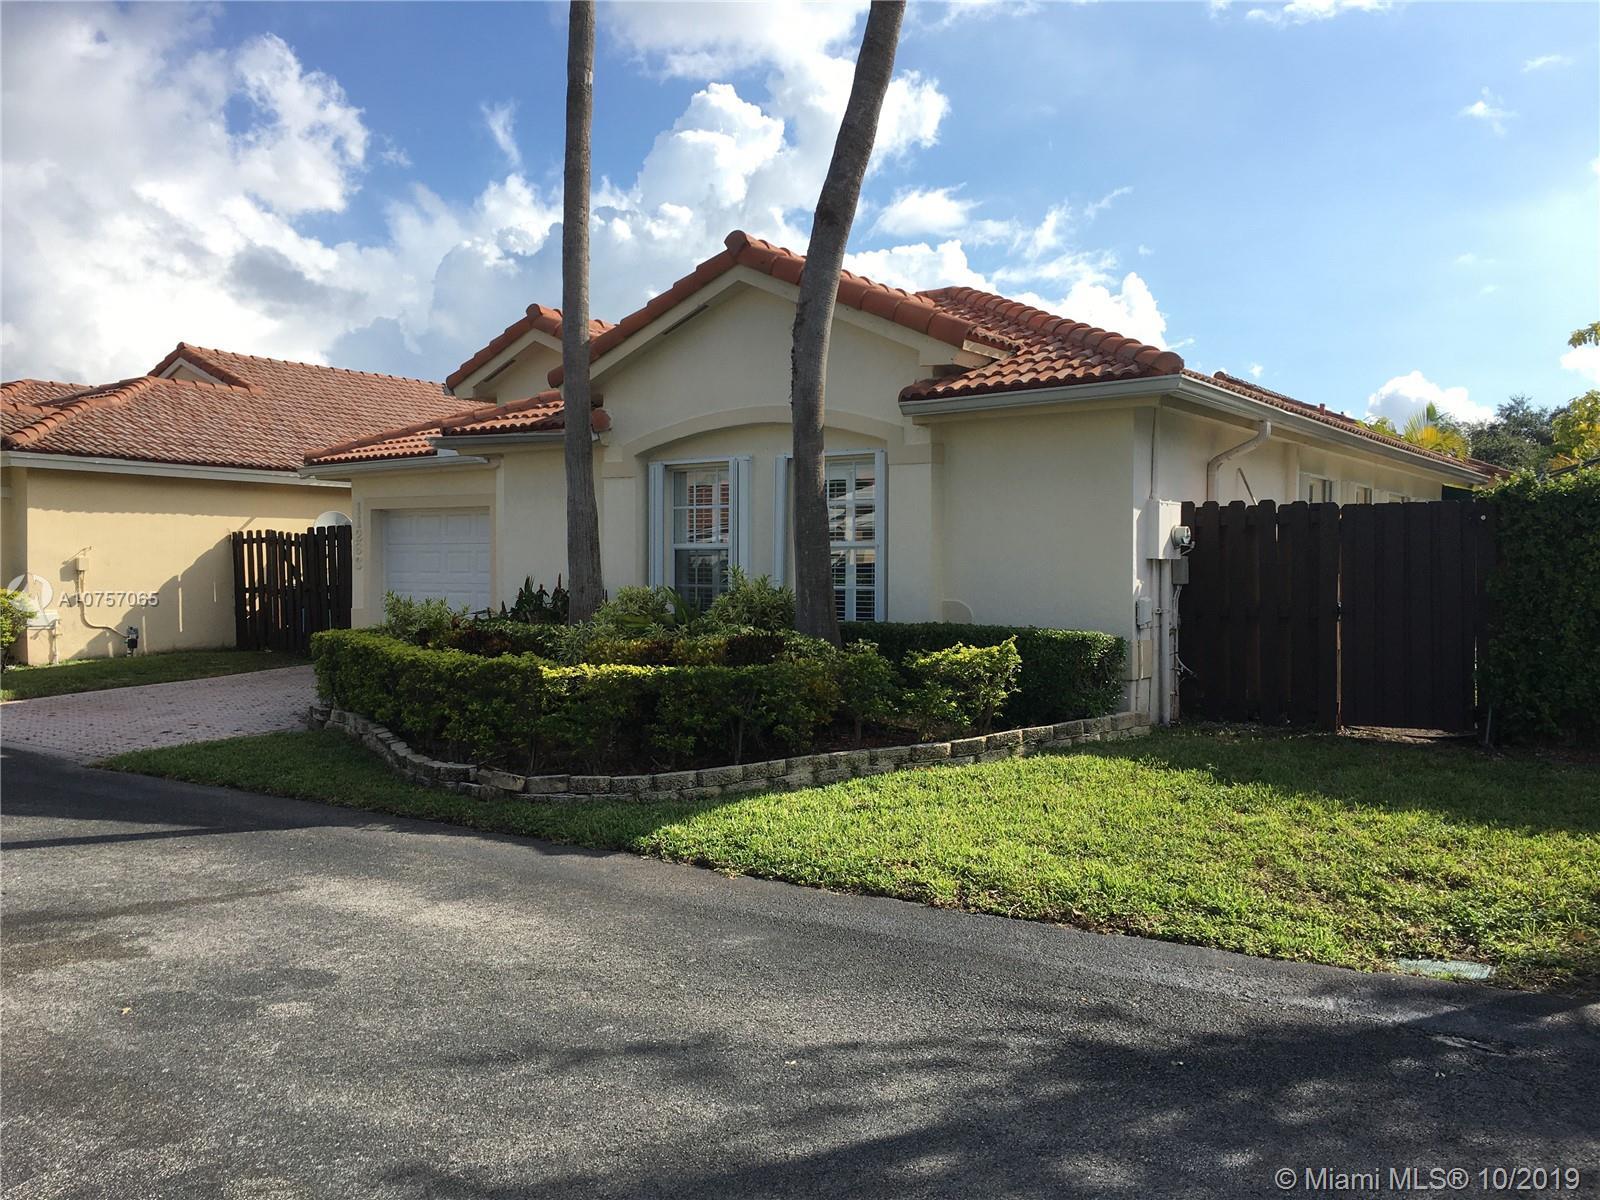 11263 NW 58th Ter, Doral, FL 33178